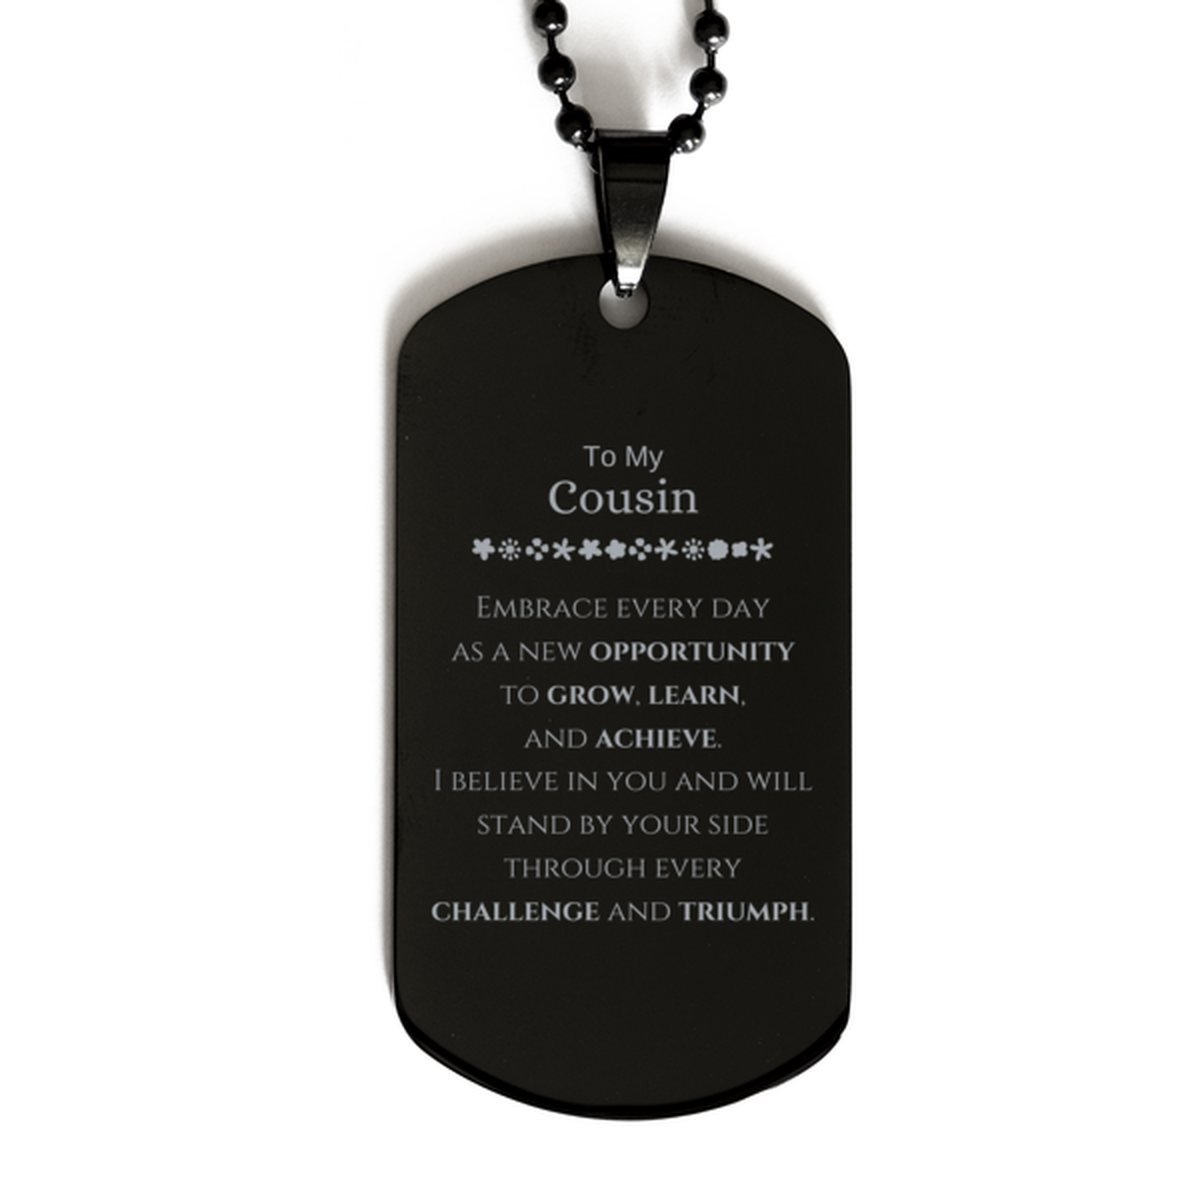 To My Cousin Gifts, I believe in you and will stand by your side, Inspirational Black Dog Tag For Cousin, Birthday Christmas Motivational Cousin Gifts